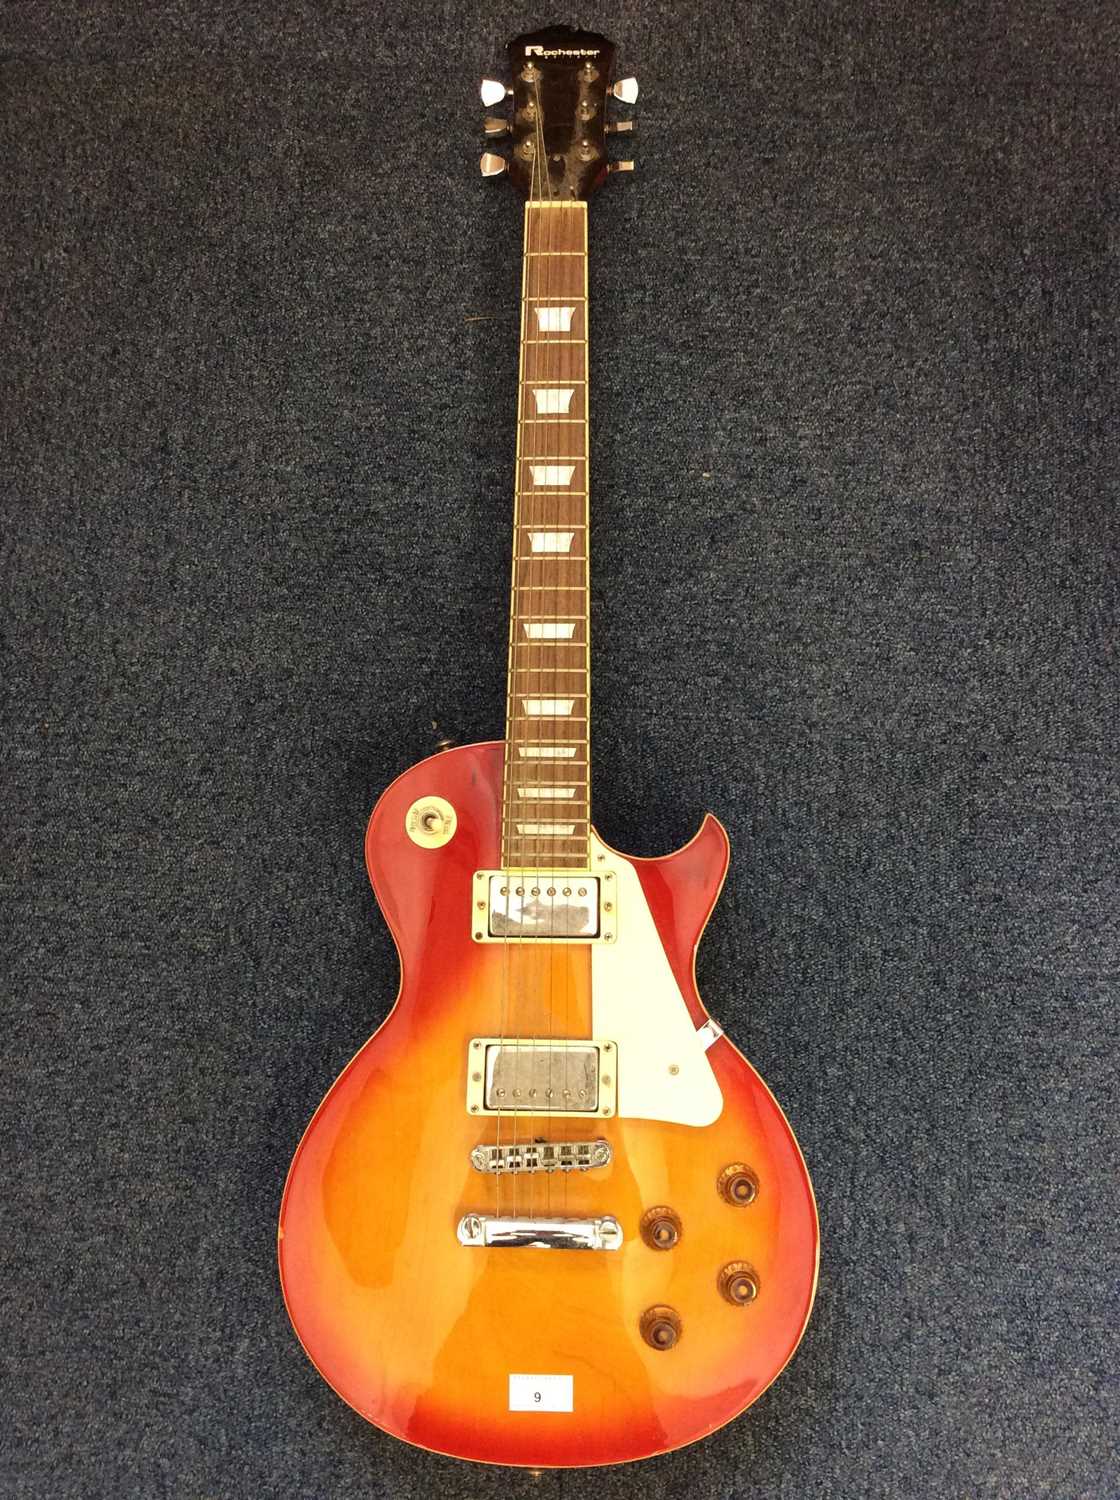 Lot 9 - Rochester electric guitar